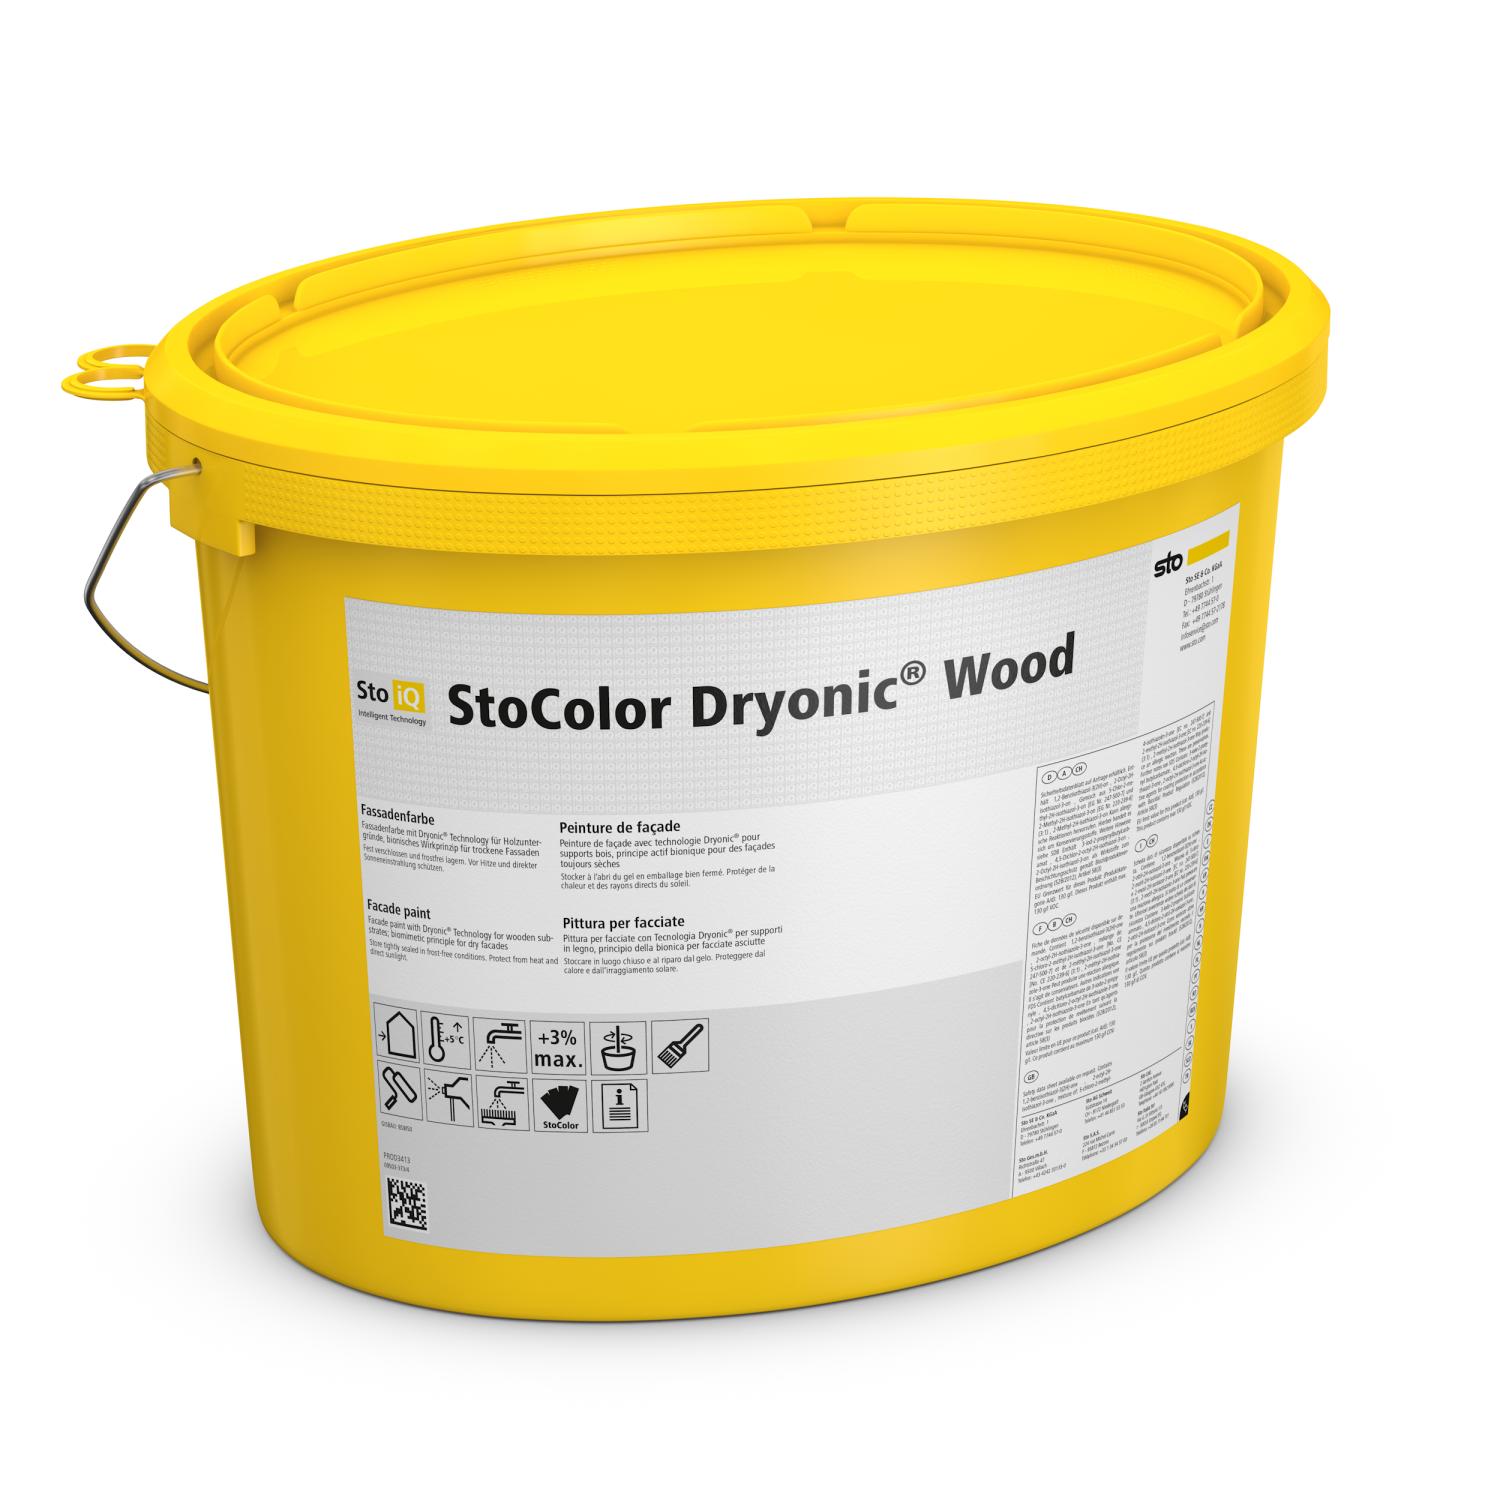 StoColor Dryonic Wood weiß - 2,5 l Eimer